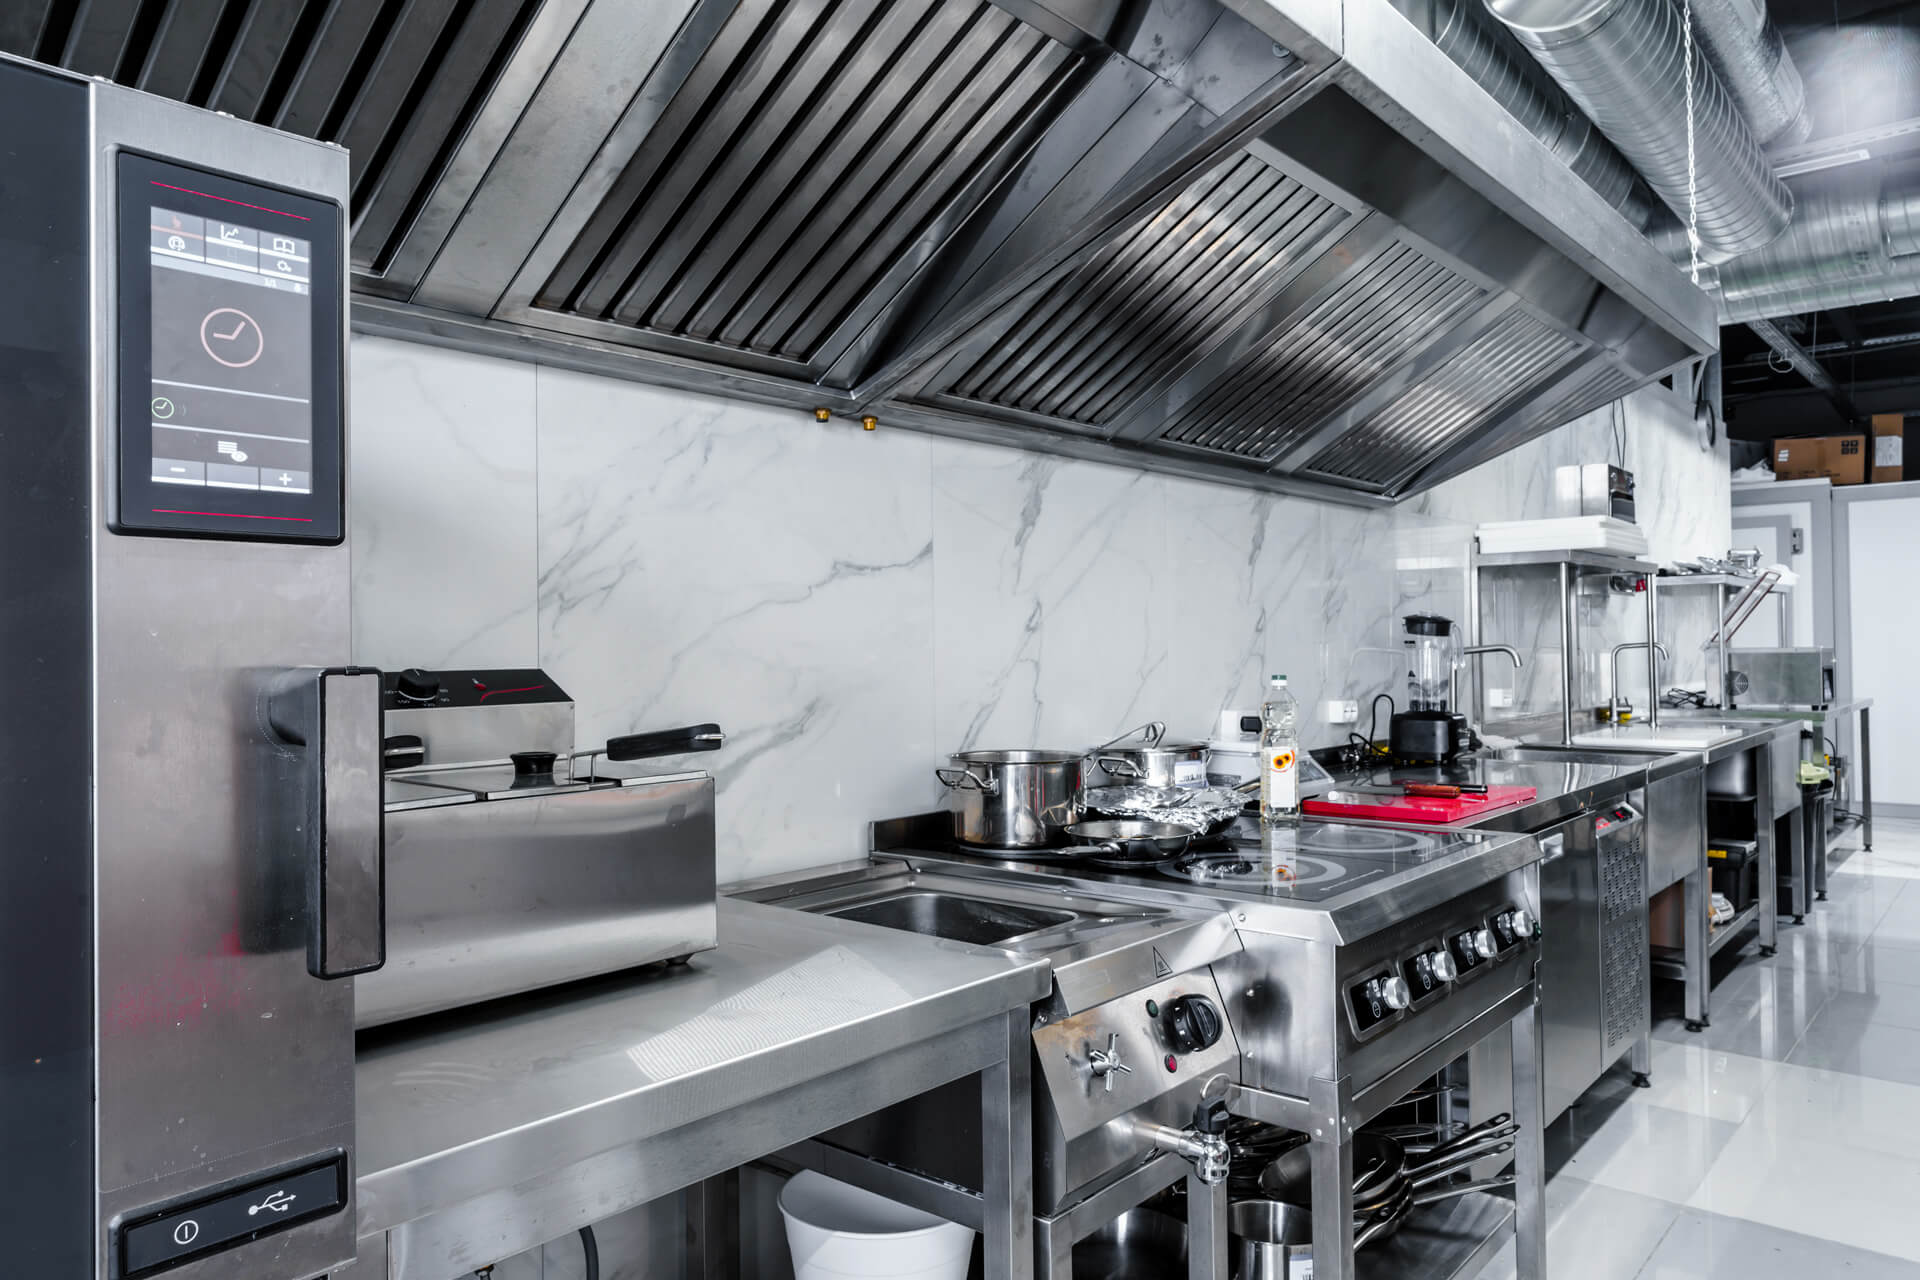 Interior of commercial kitchen with vent hood